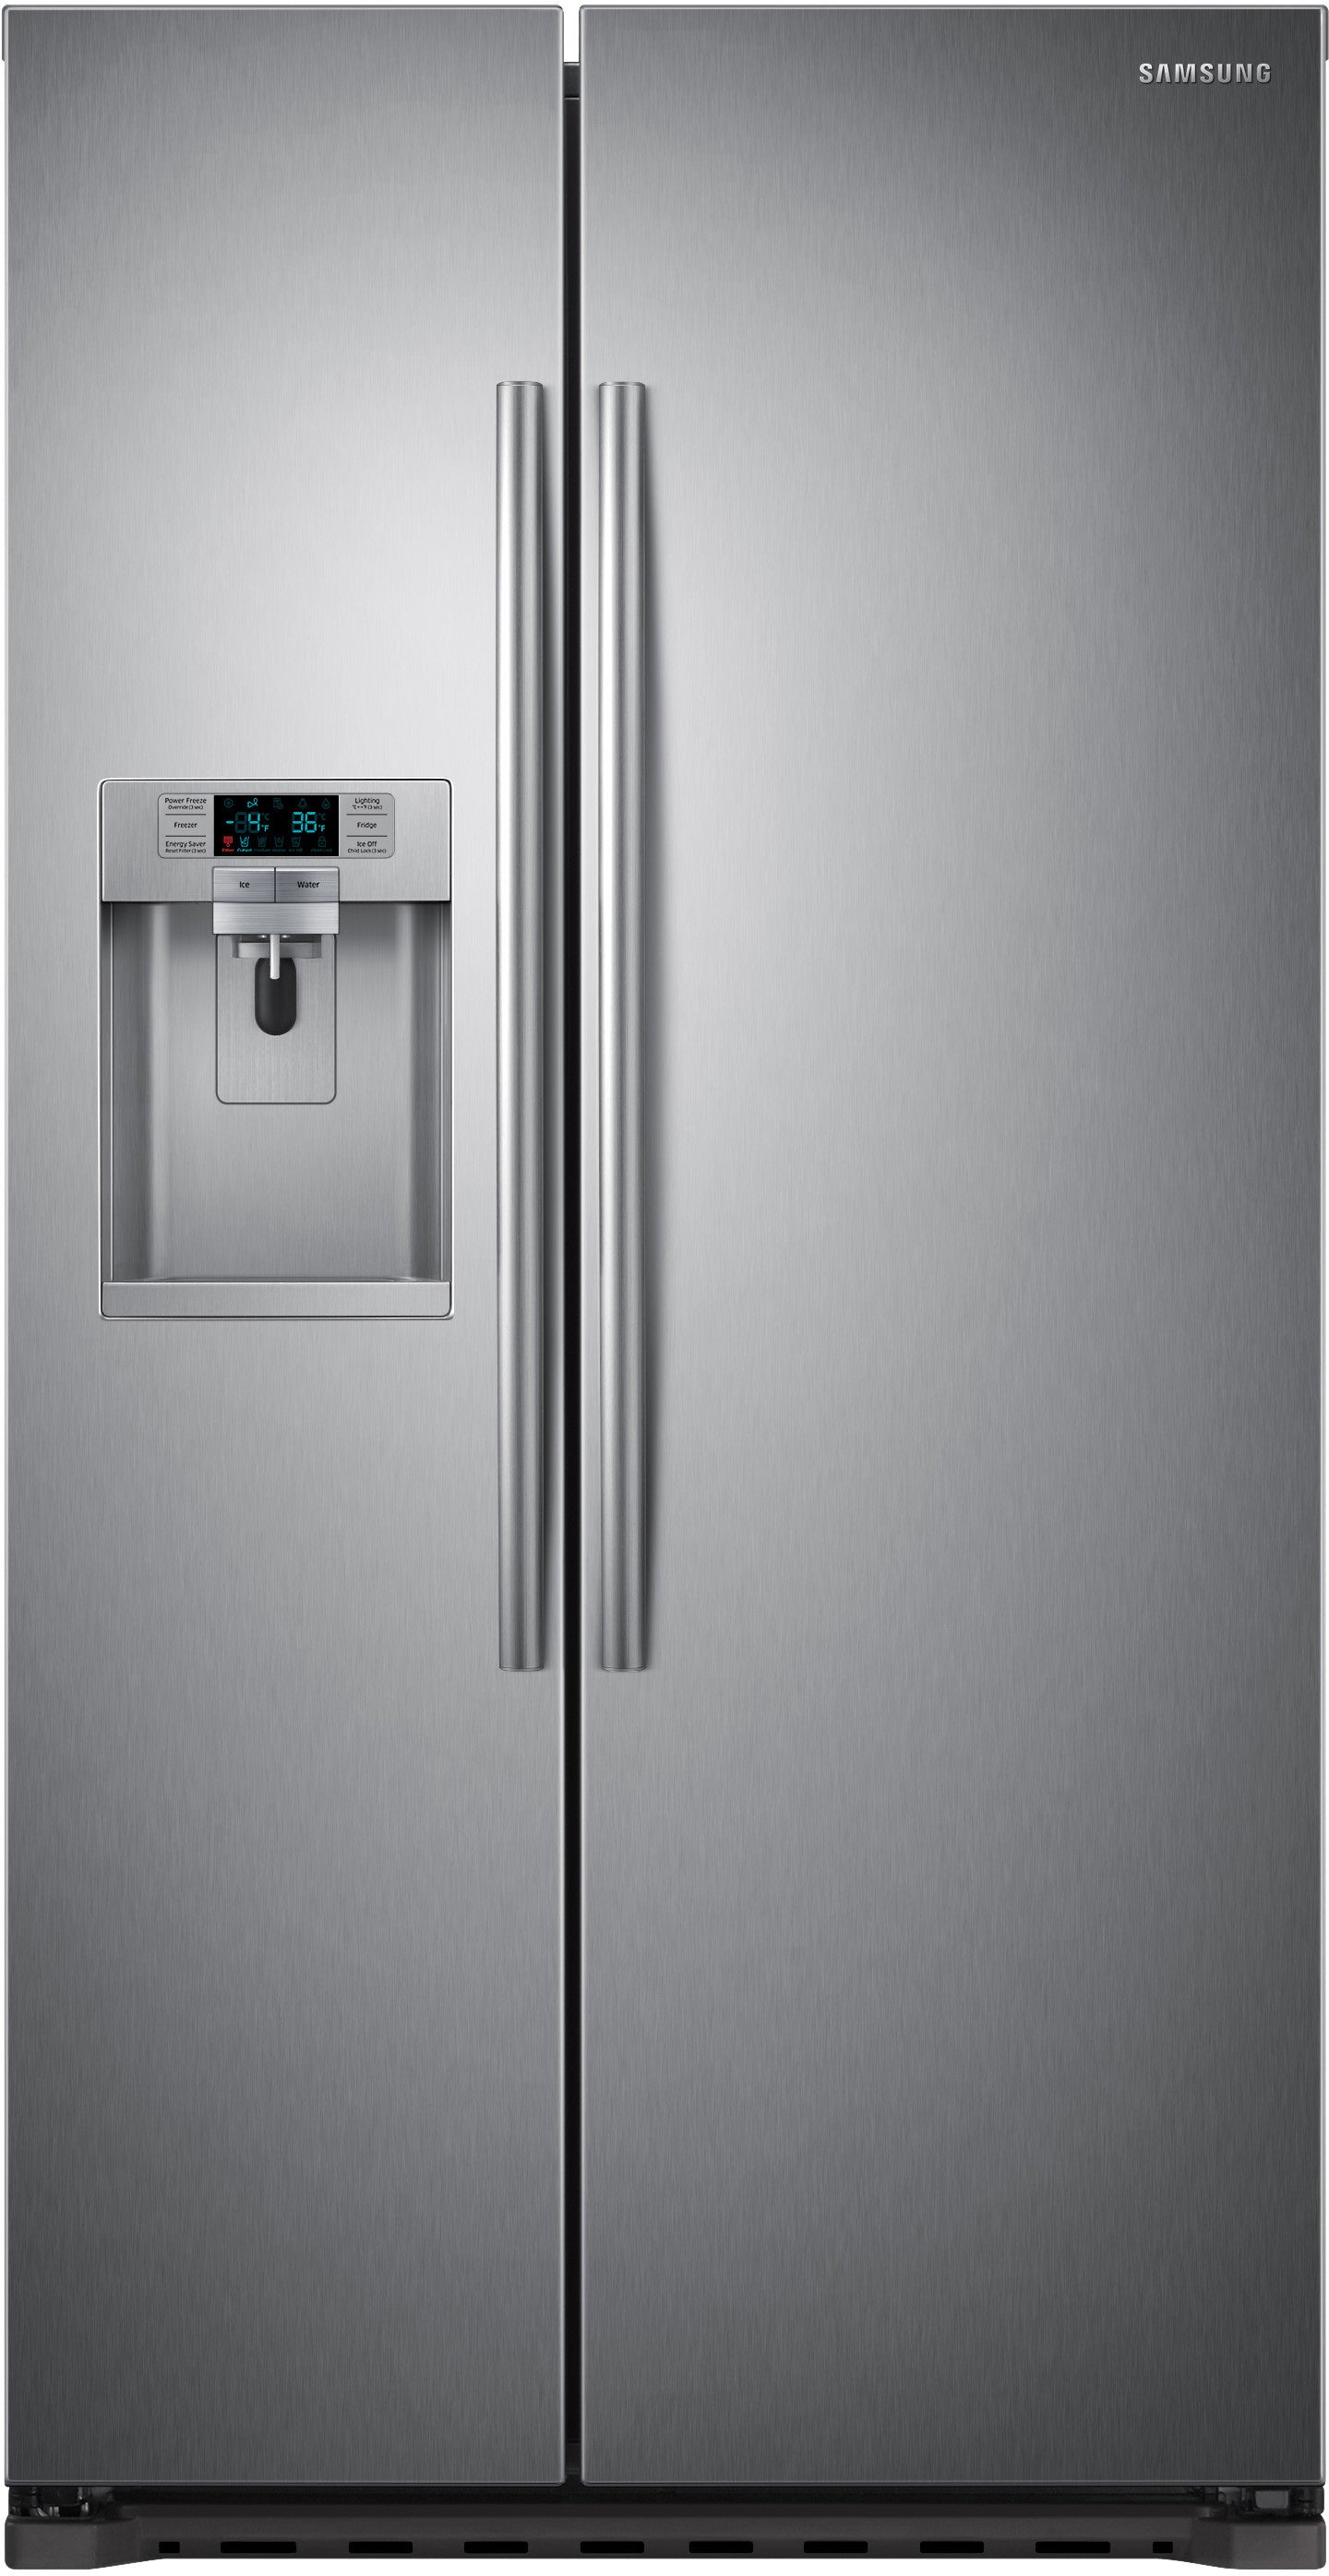 Samsung RS22HDHPNSR/AA 22.3 Cu. Ft. Counter-depth Side-by-side Refrigerator - Samsung Parts USA